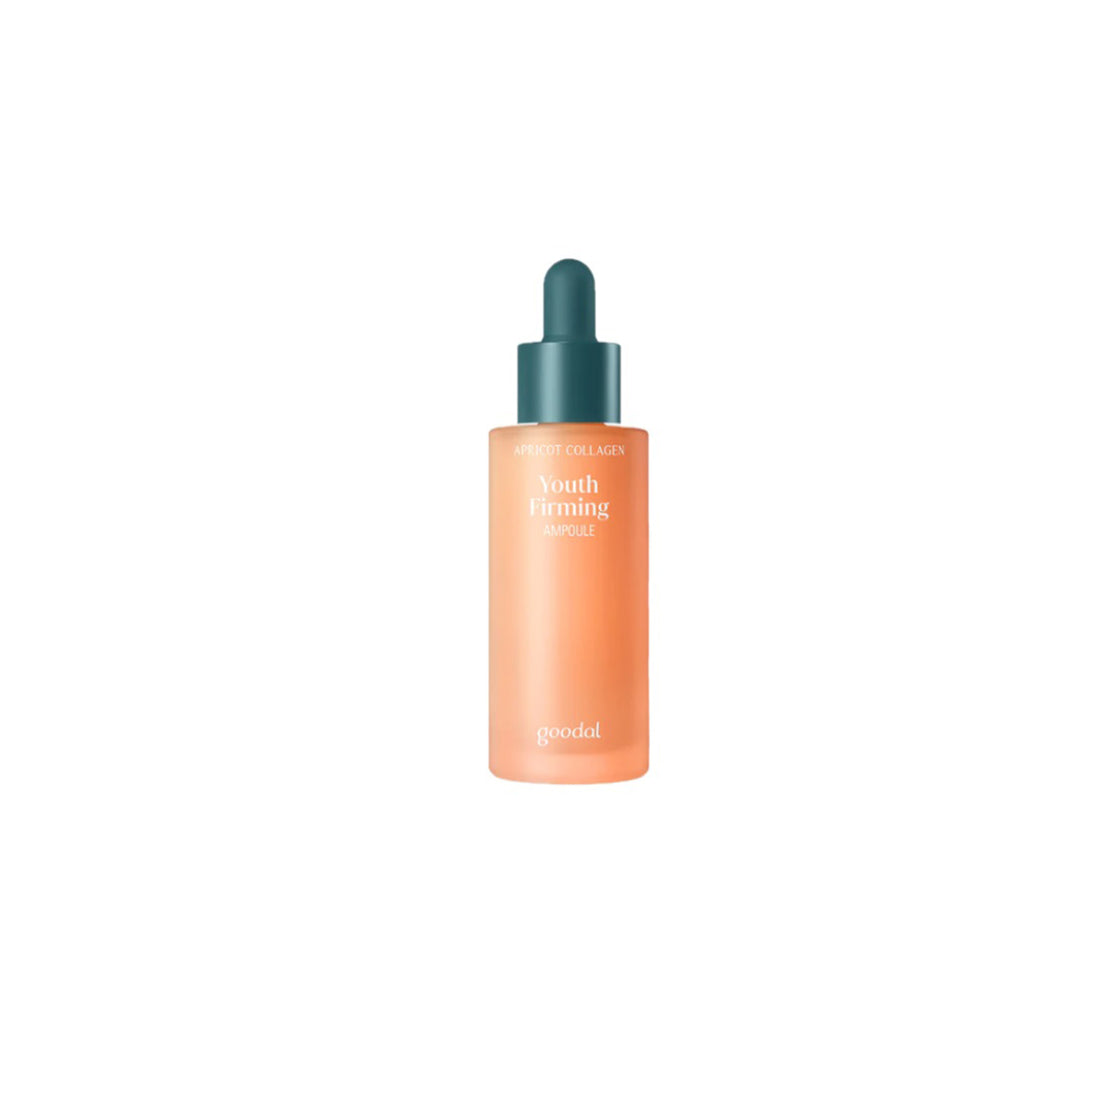 Goodal Apricot Collagen Youth Firming Ampoule